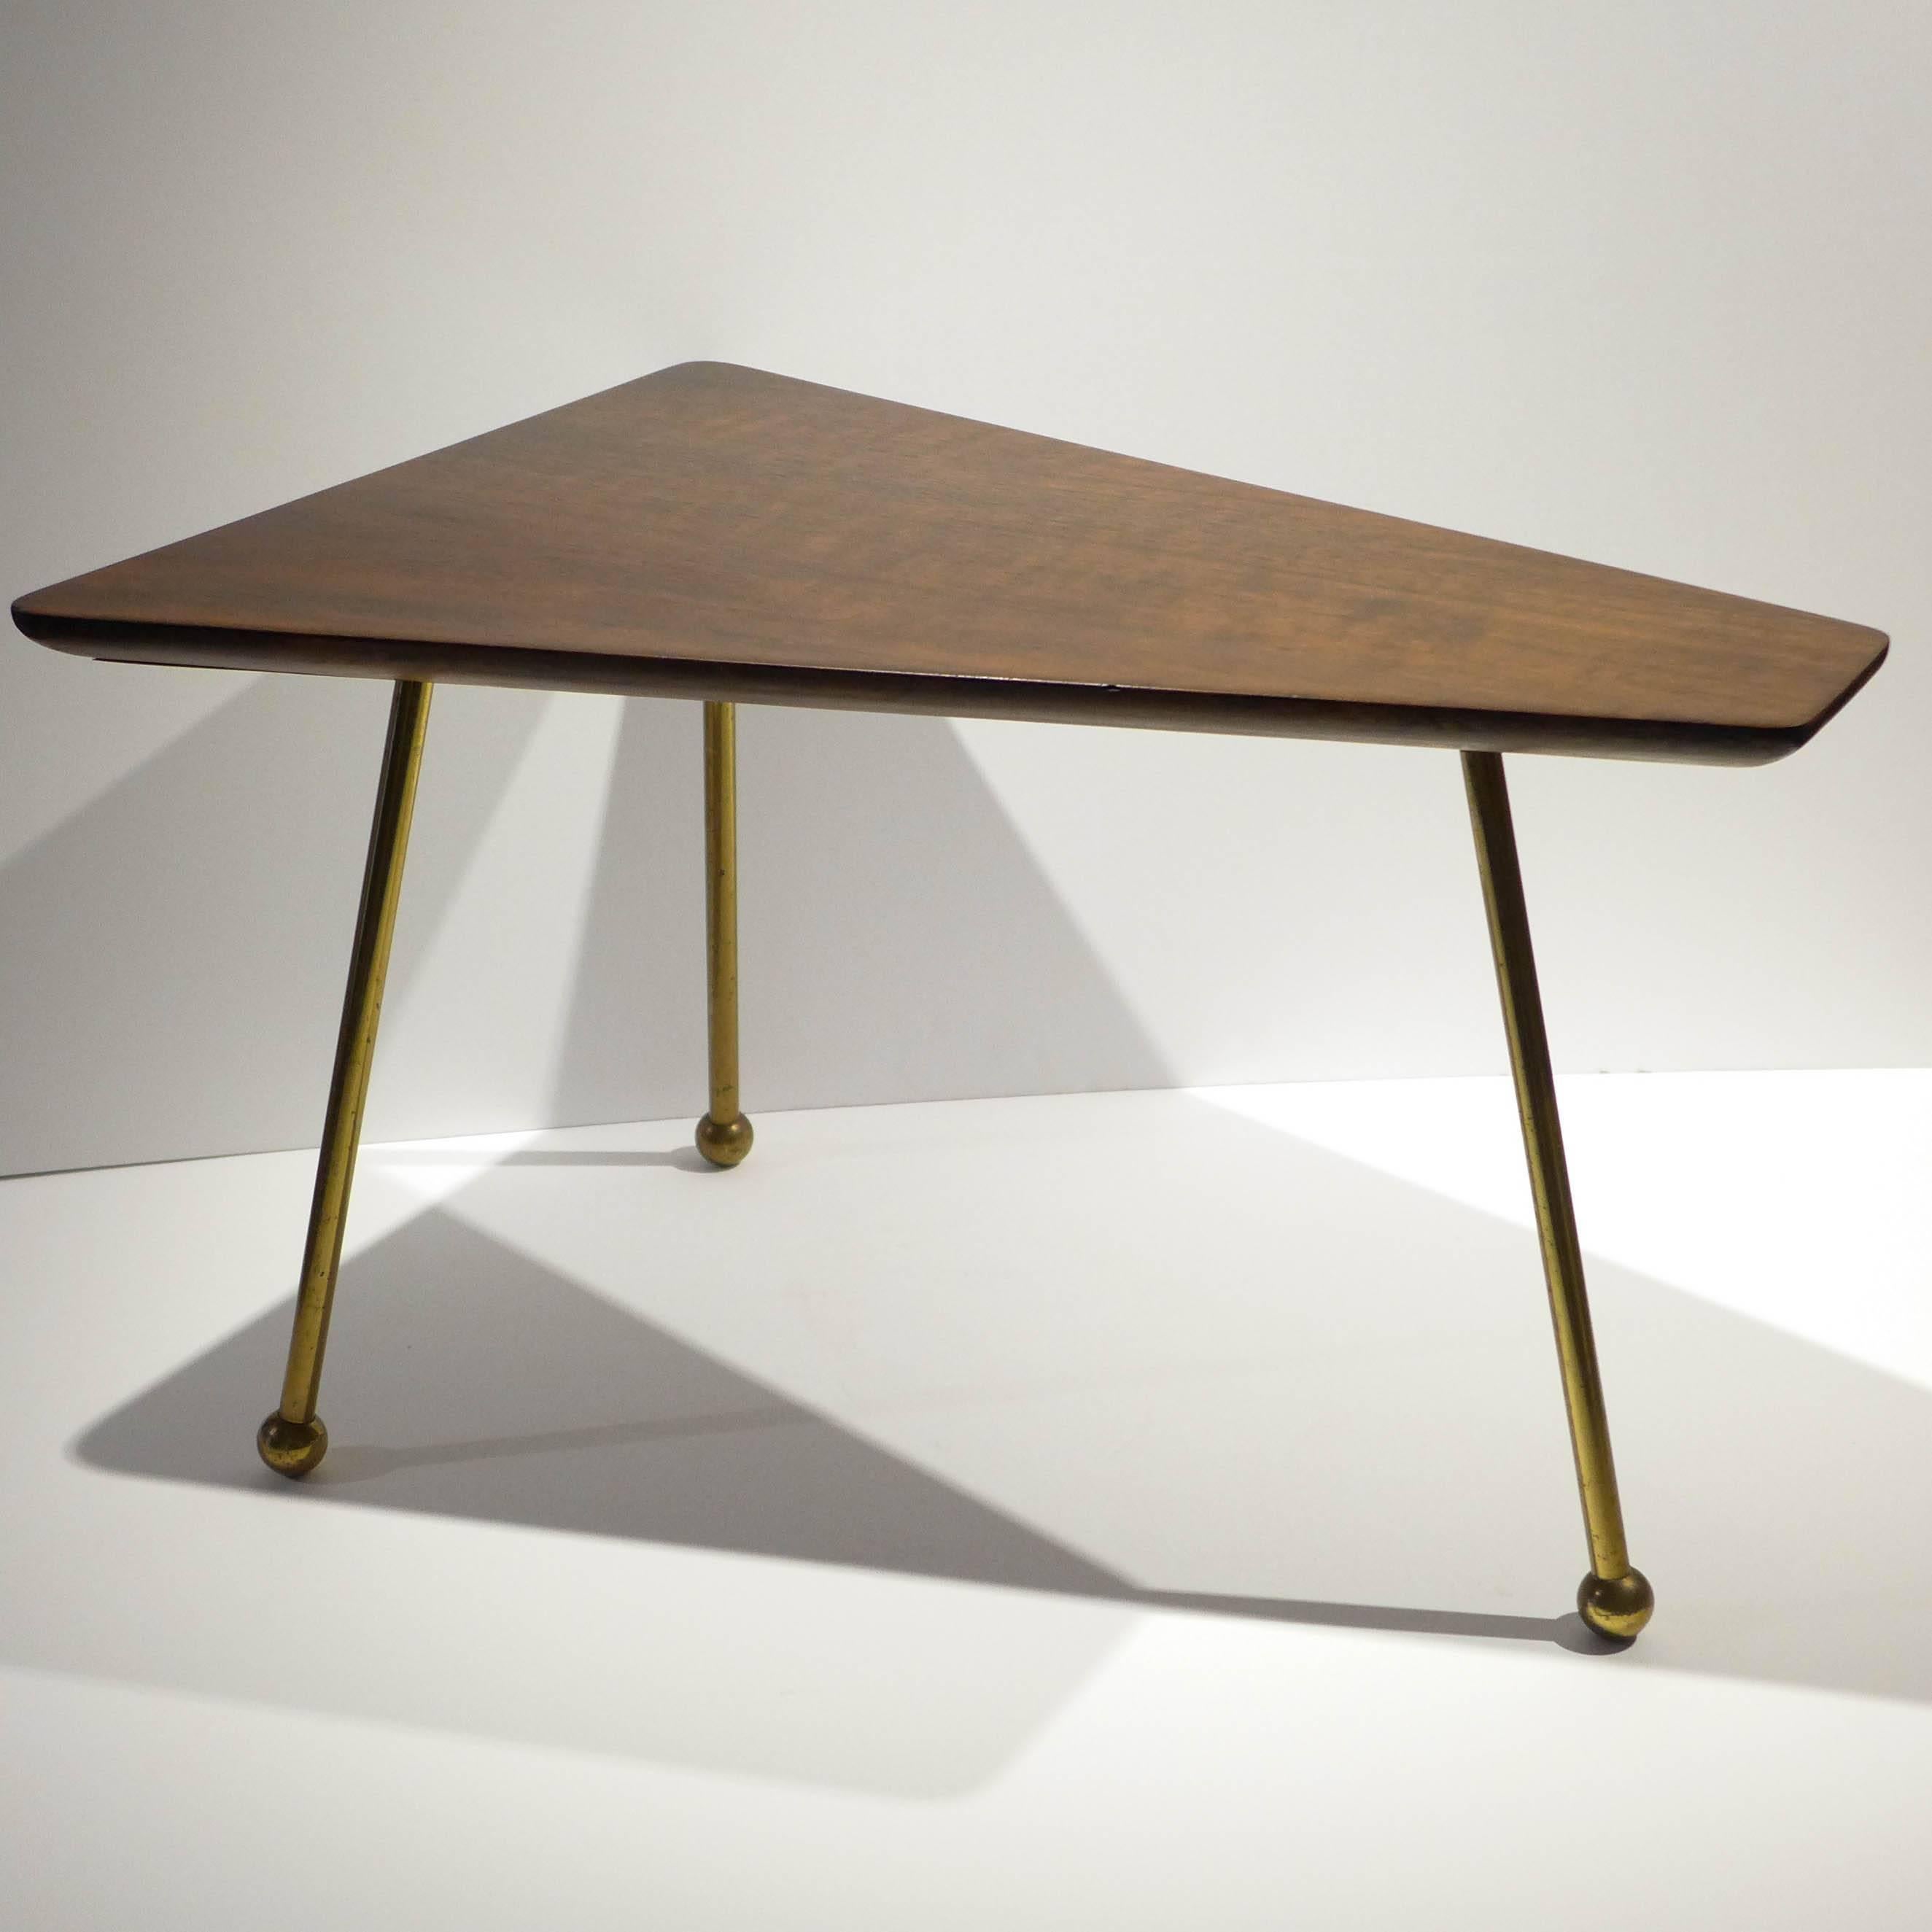 Rare trapezoidal side table with walnut top with rounded chamfered edges and solid brass demountable legs culminating in ball feet. Designed and produced by Martin Freedgood, circa 1951. Freedgood was a largely self-taught designer who studied